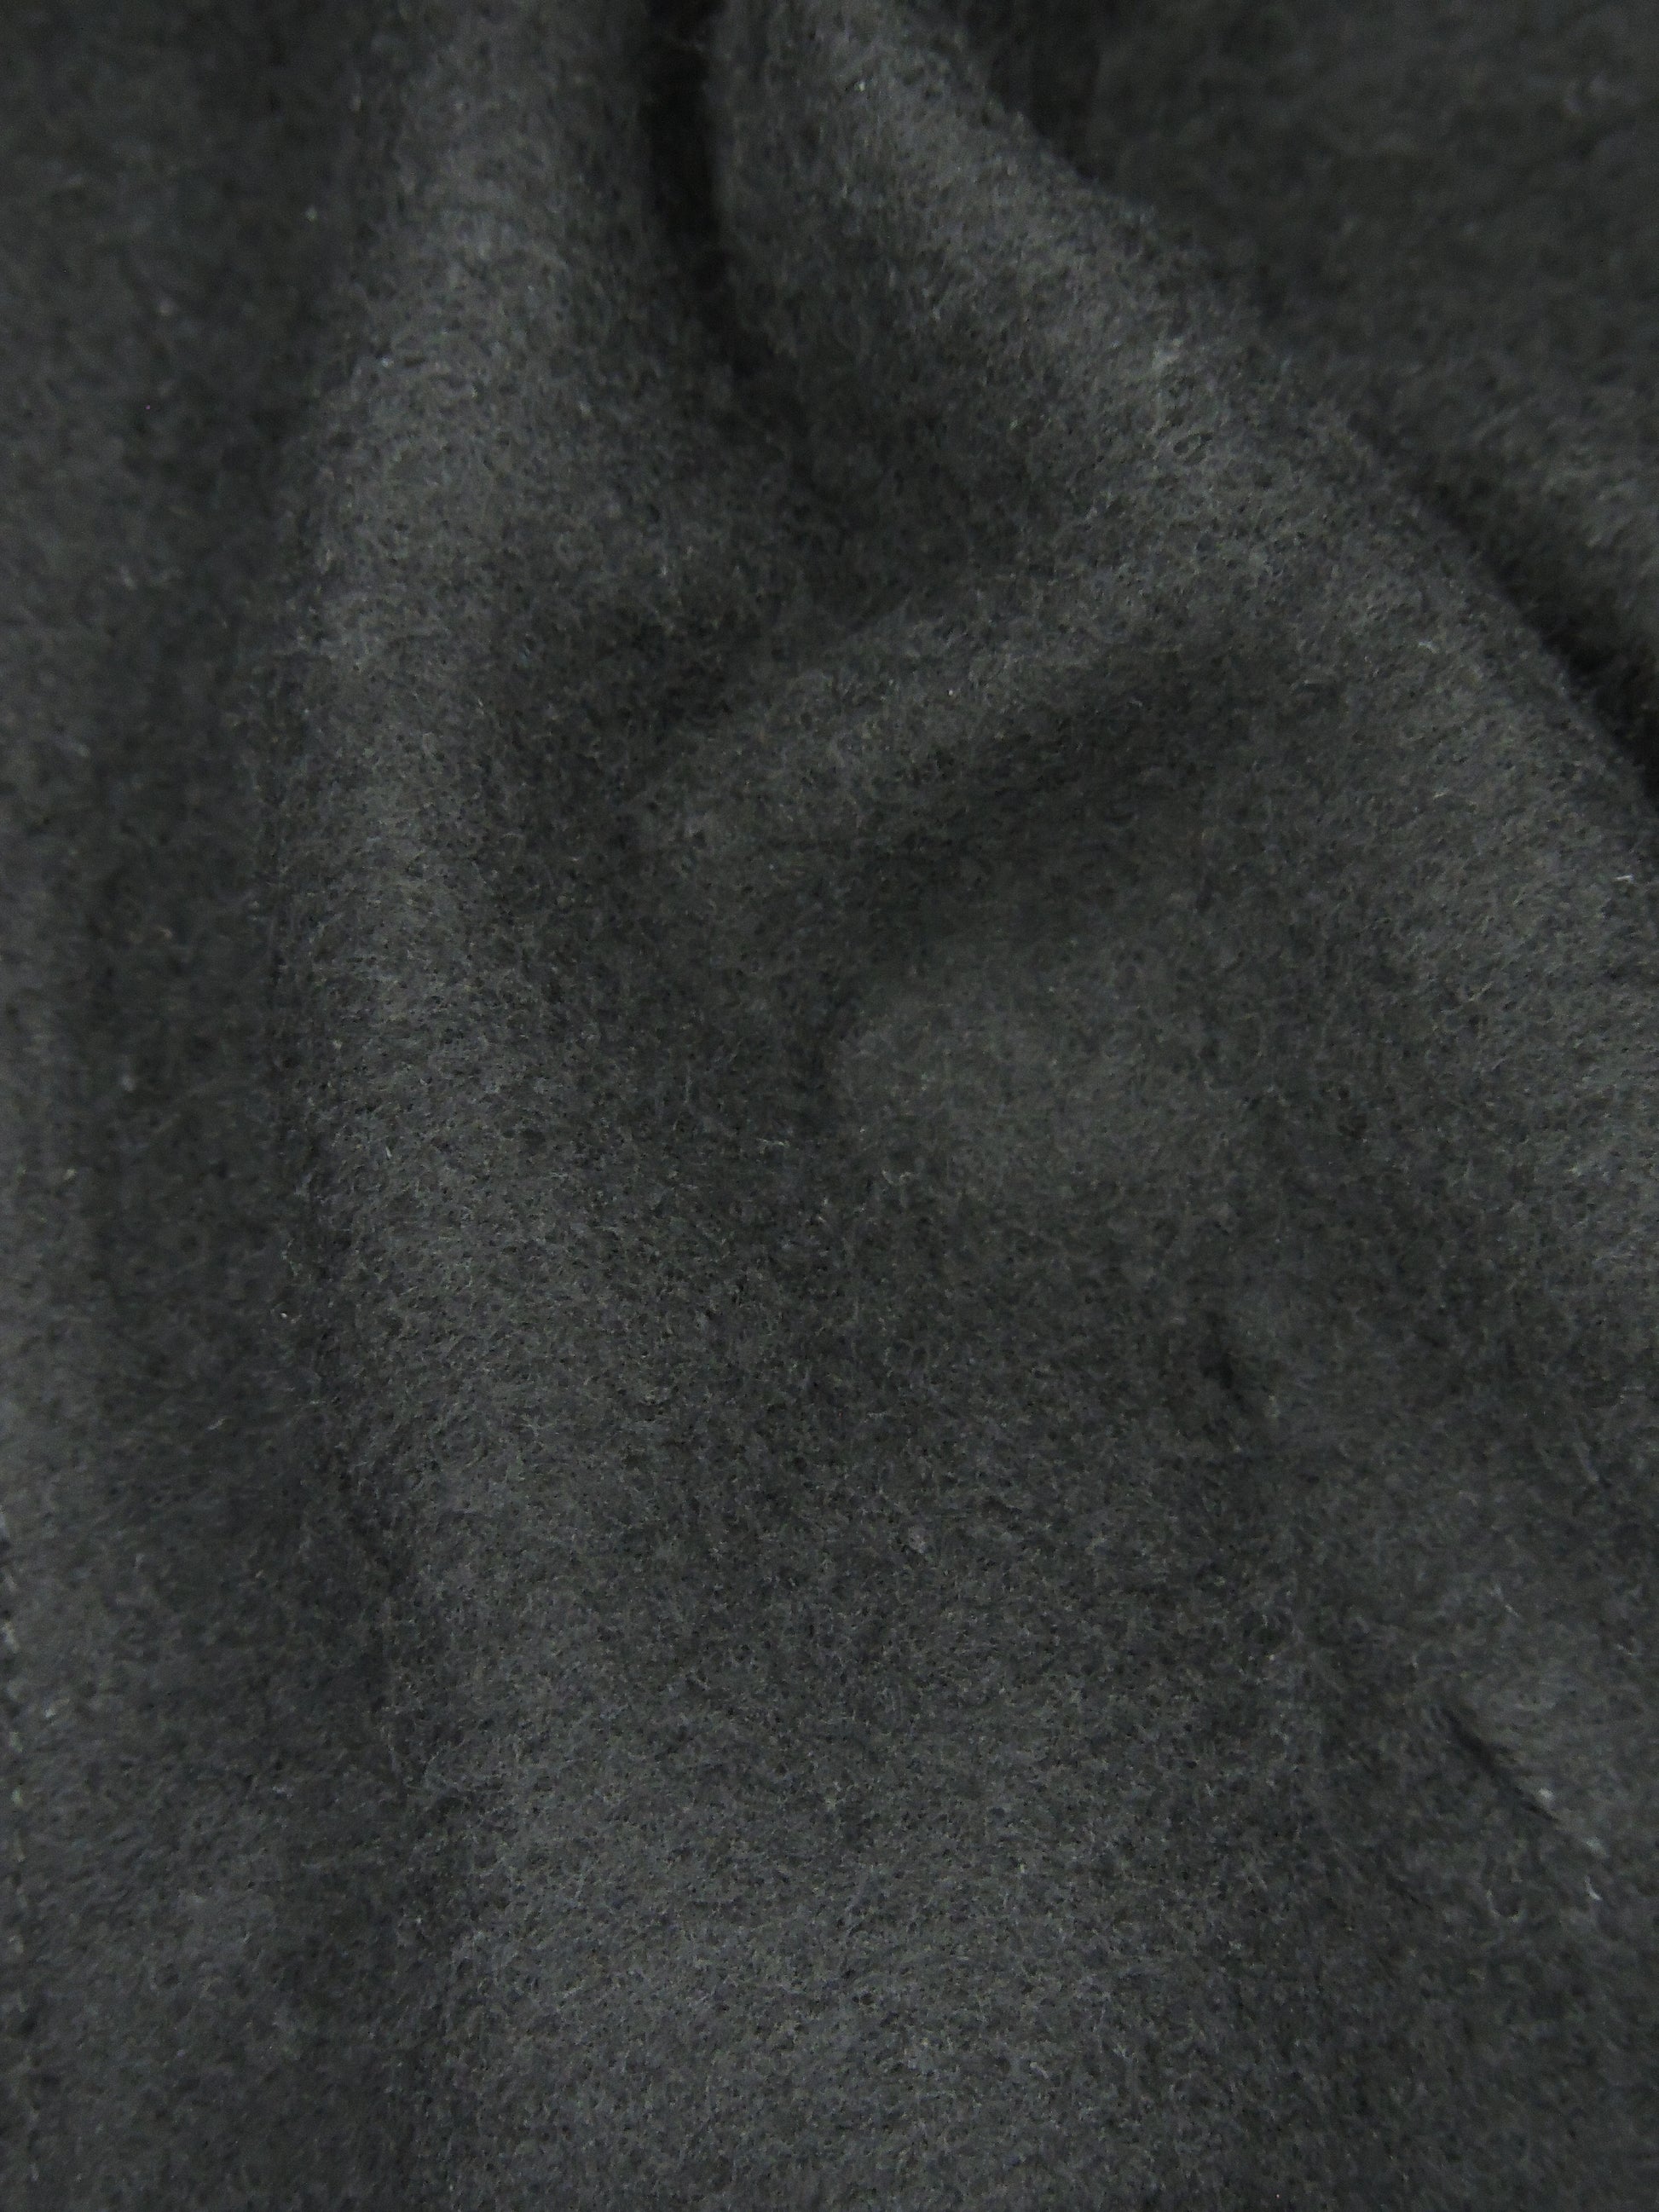 Another close up of fleece fabric.